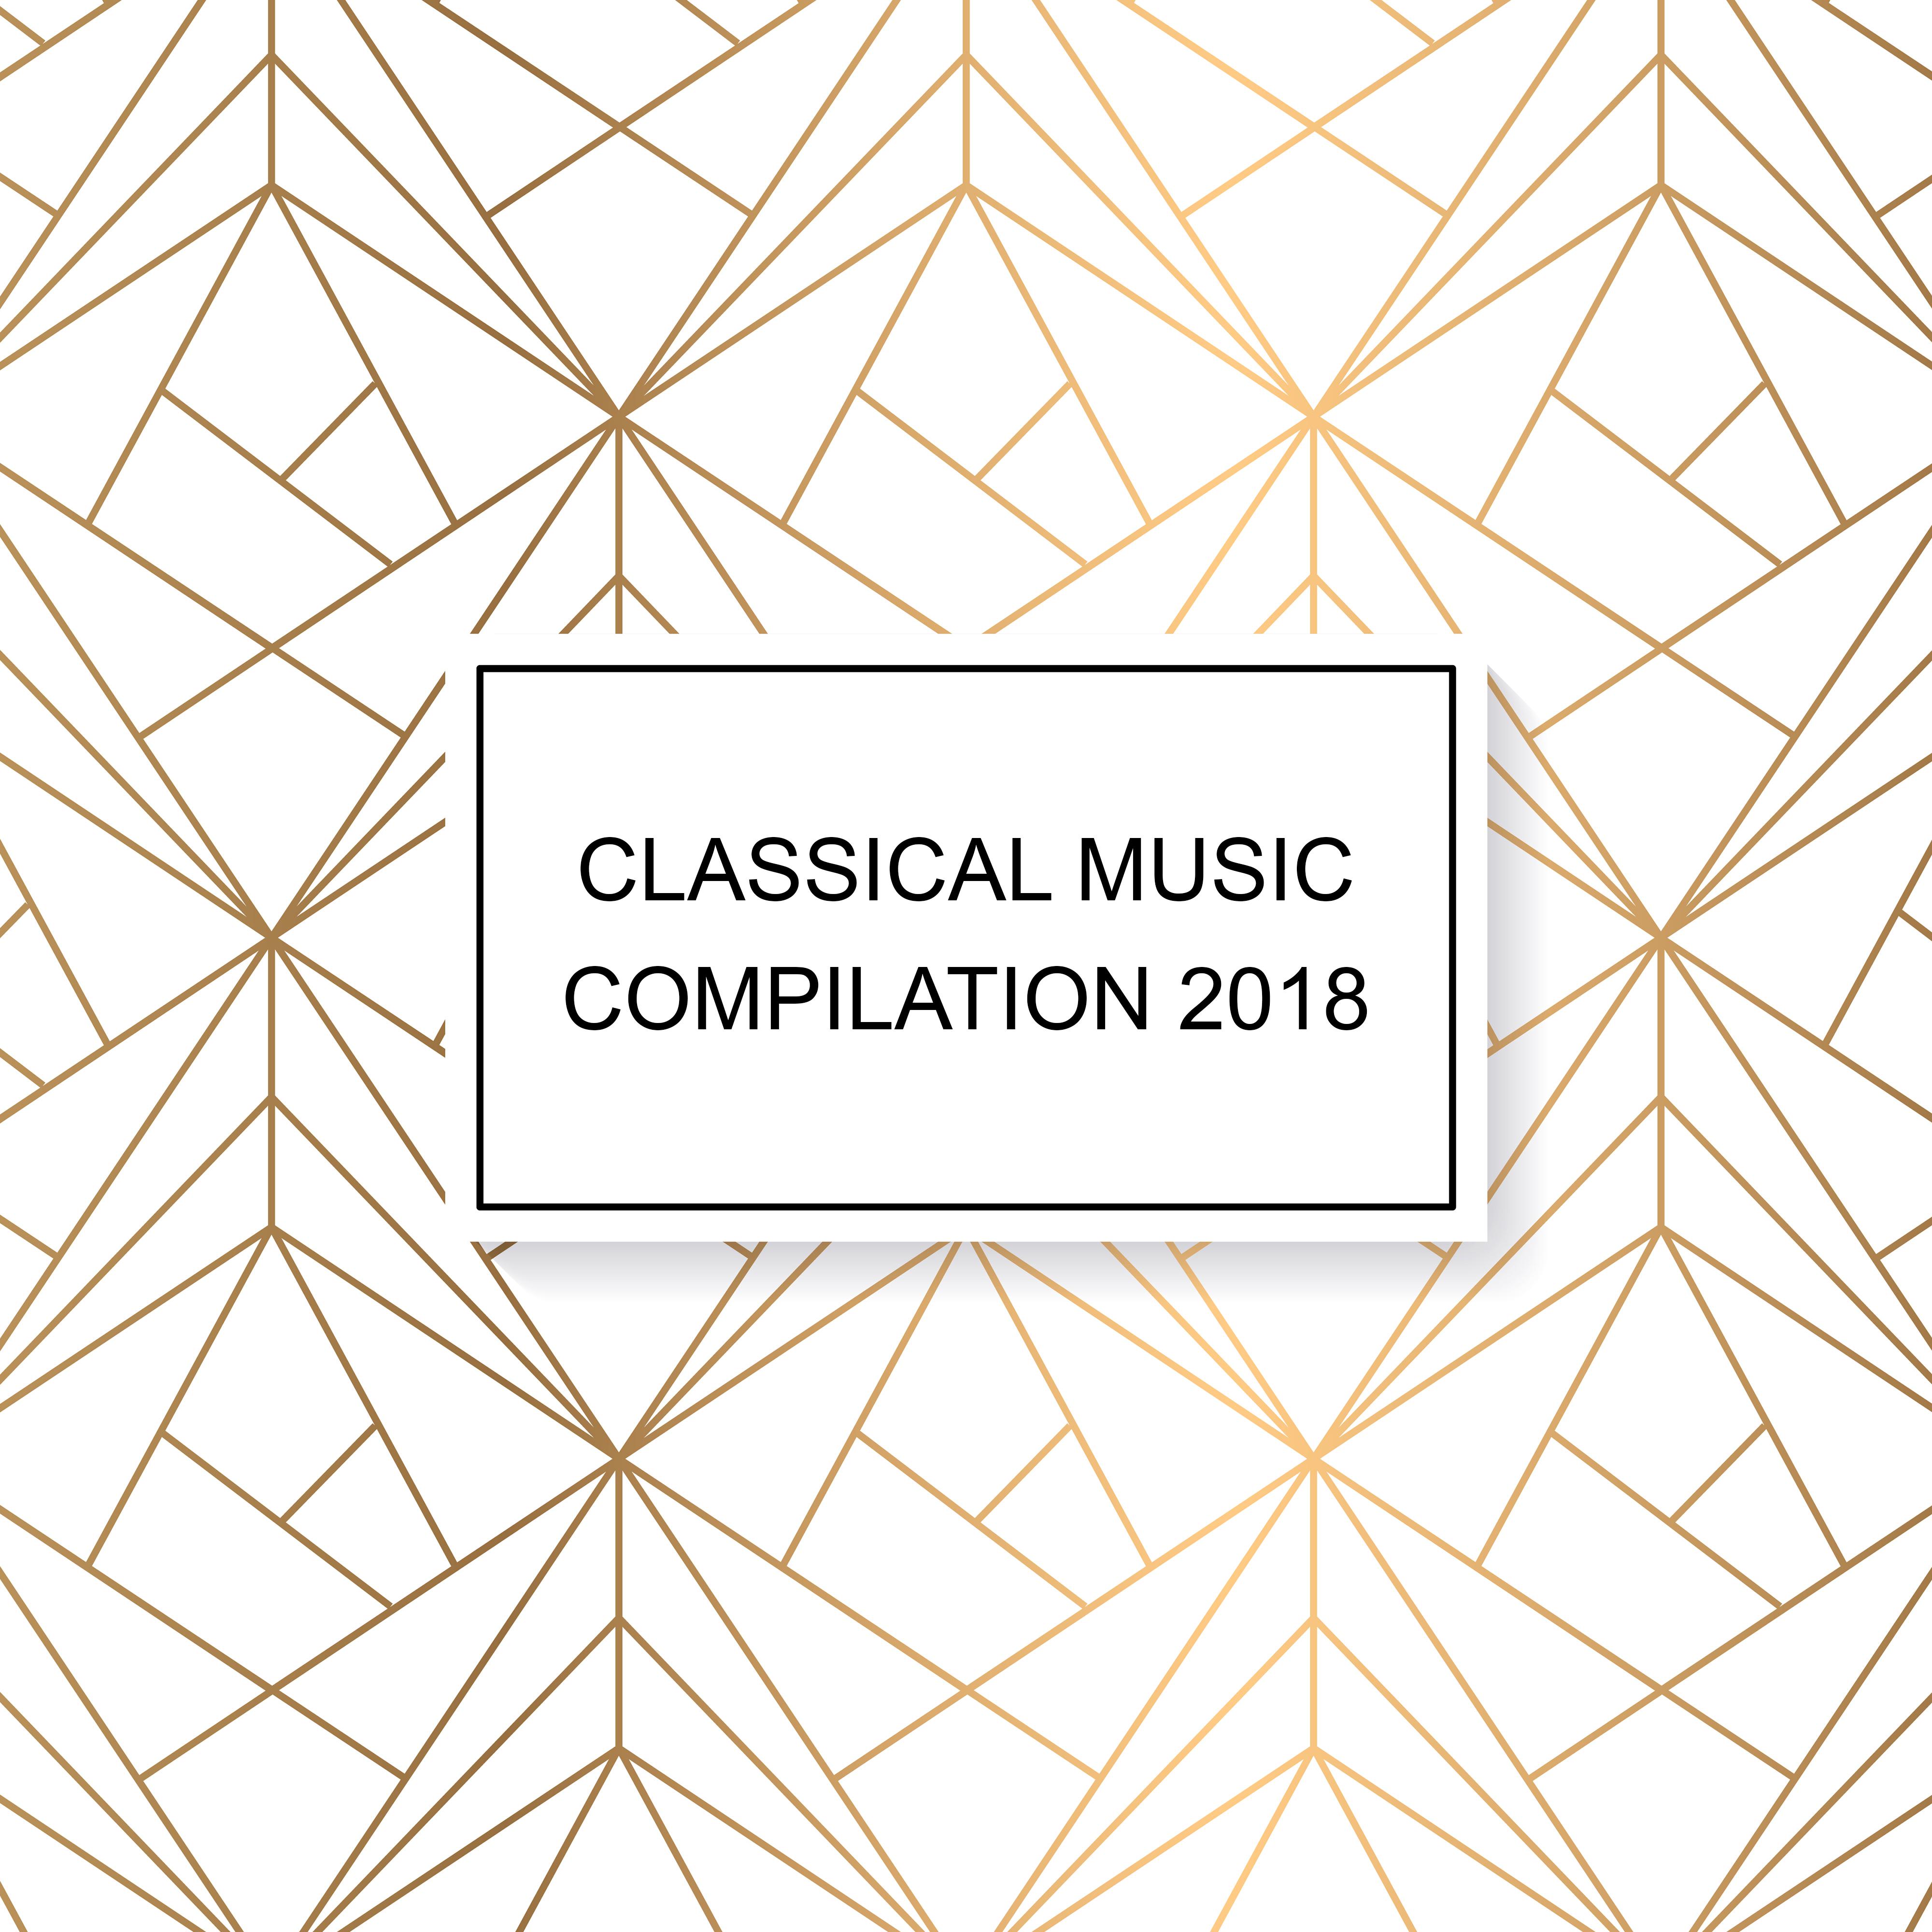 Classical Music Compilation 2018